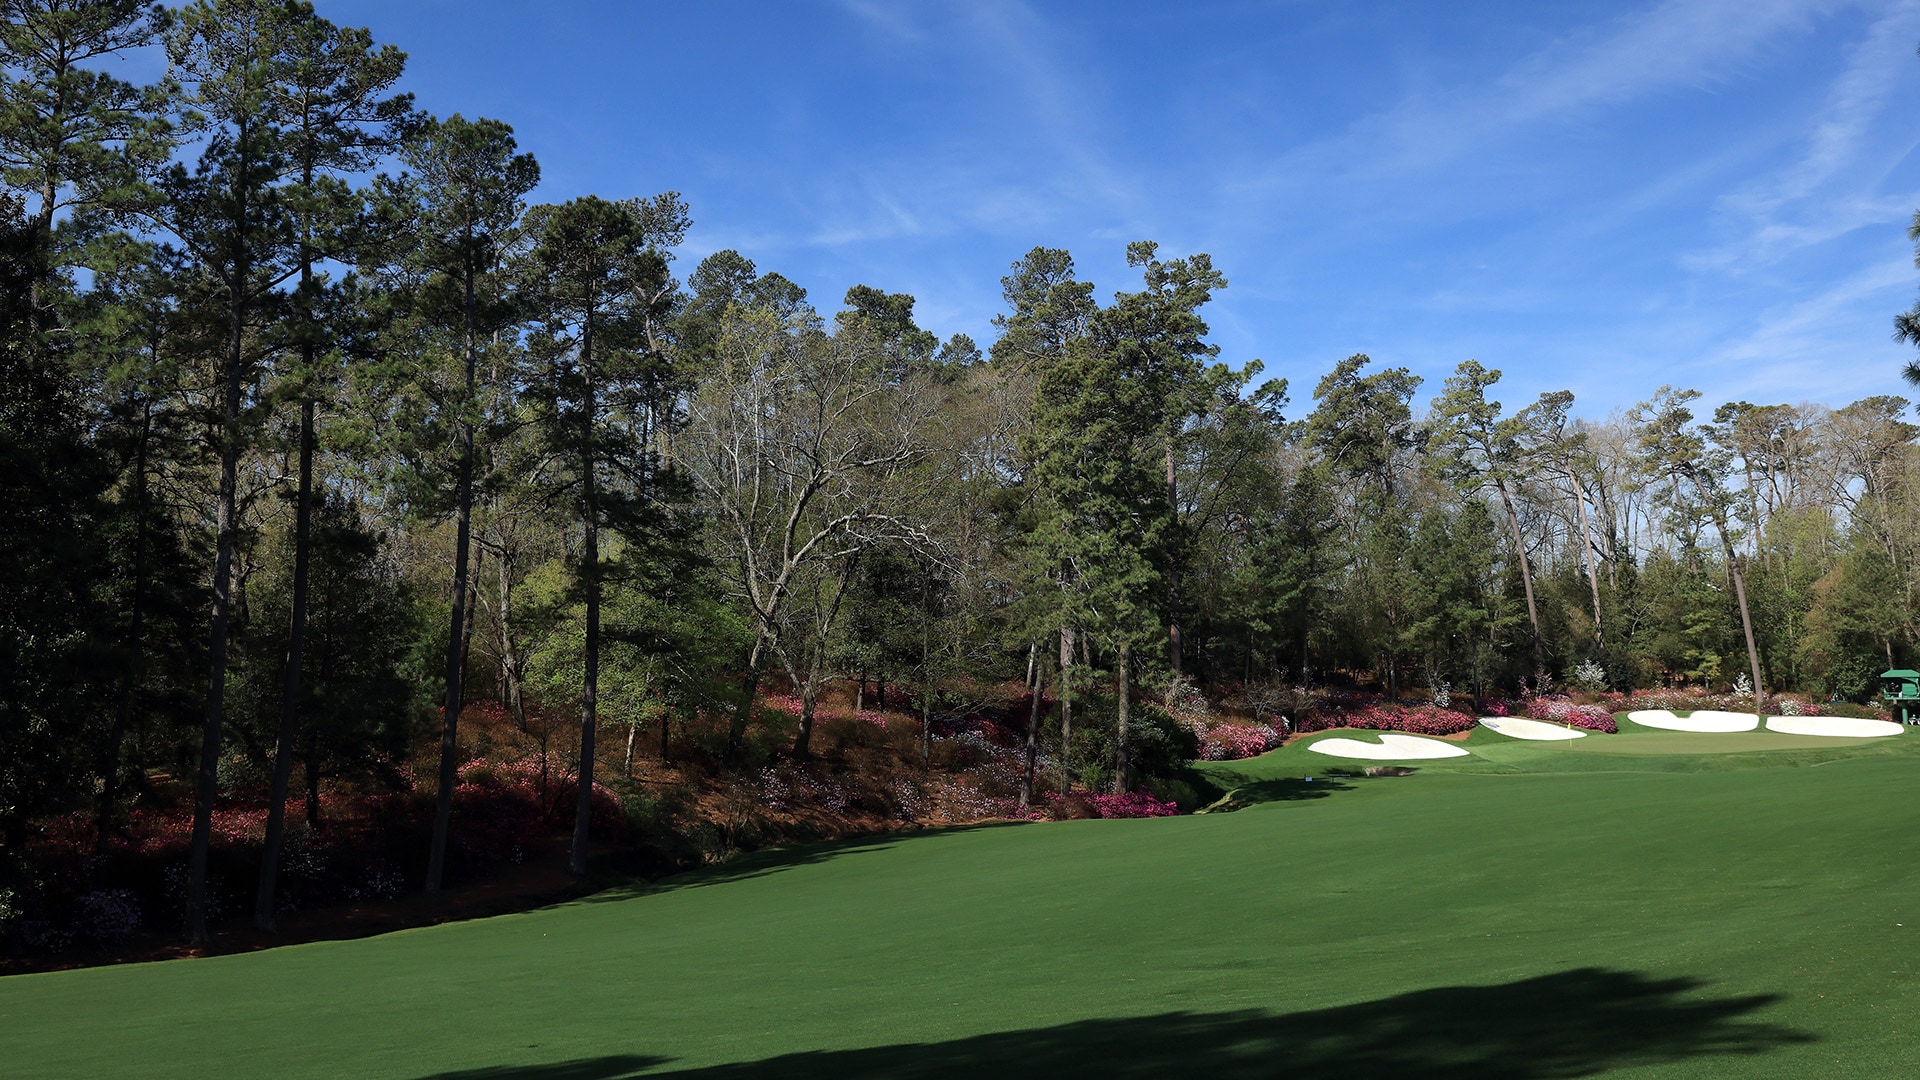 It’s official: We know how long the 13th hole will play at this year’s Masters